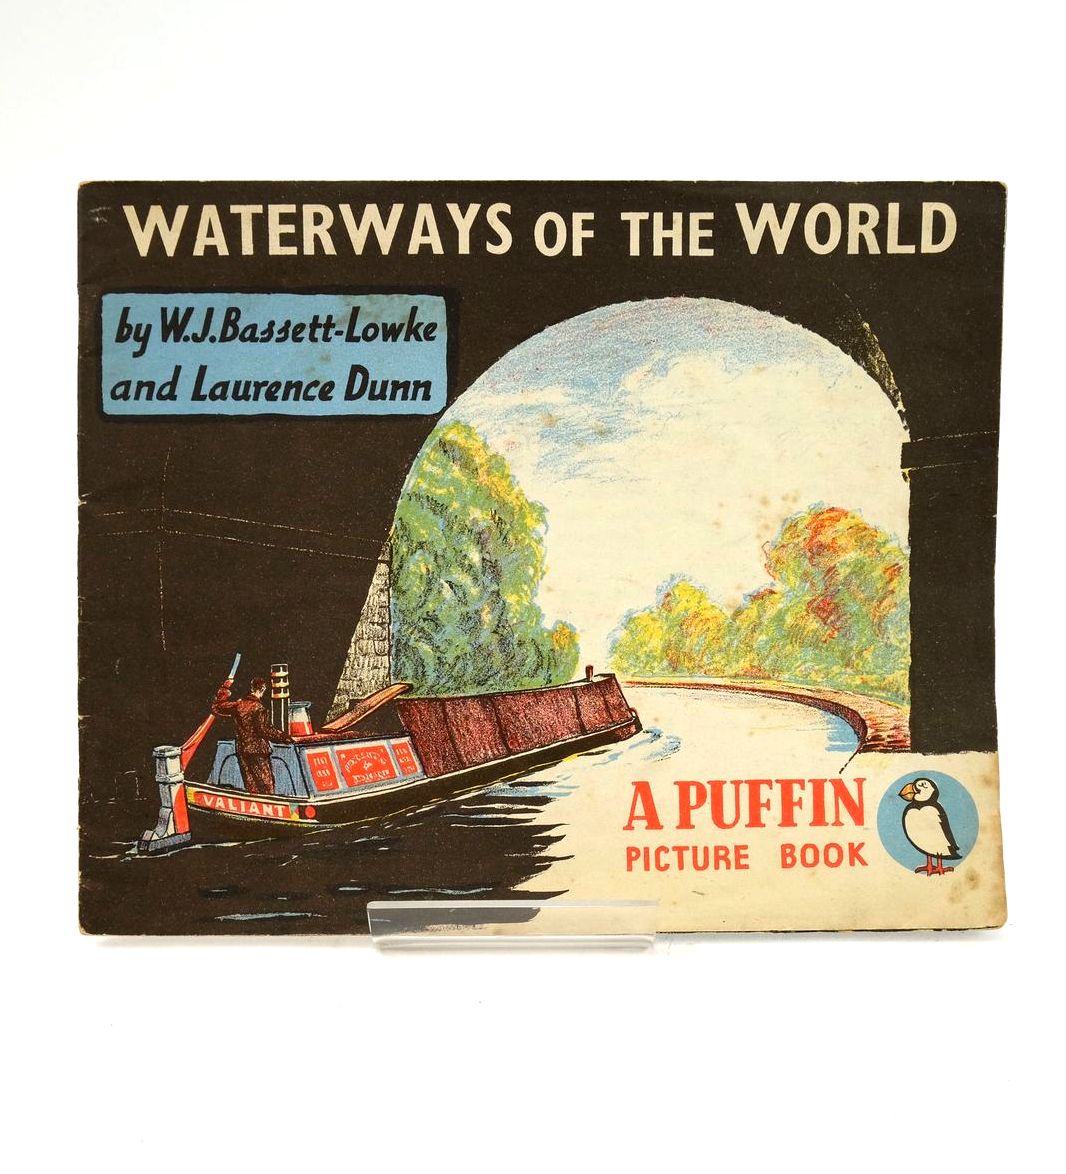 Photo of WATERWAYS OF THE WORLD written by Bassett-Lowke, W.J. illustrated by Dunn, Laurence published by Penguin Books Ltd (STOCK CODE: 1324311)  for sale by Stella & Rose's Books